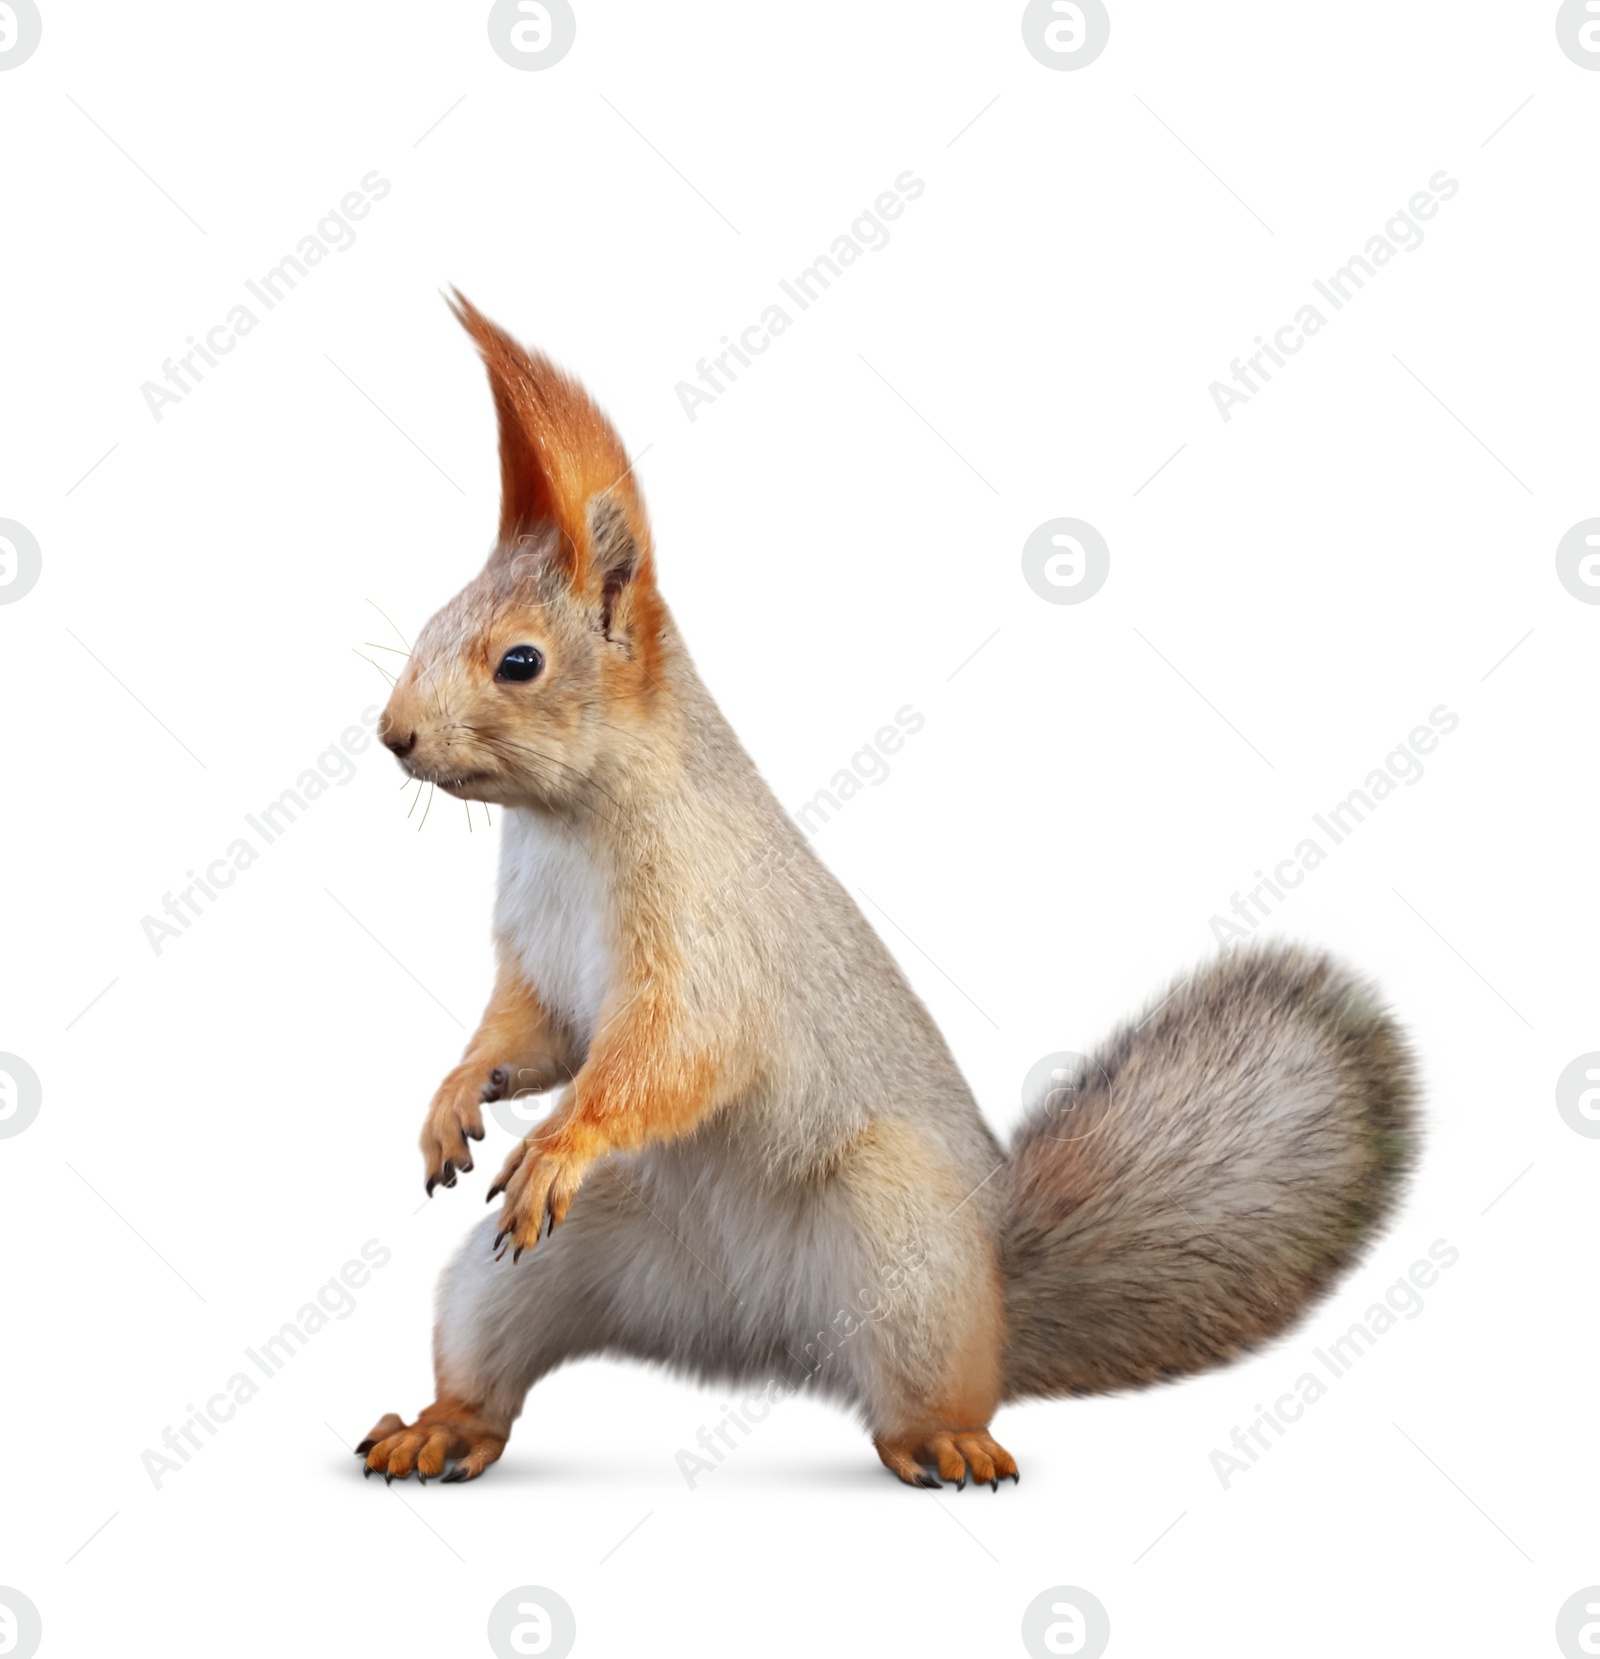 Image of Cute squirrel with fluffy tail on white background